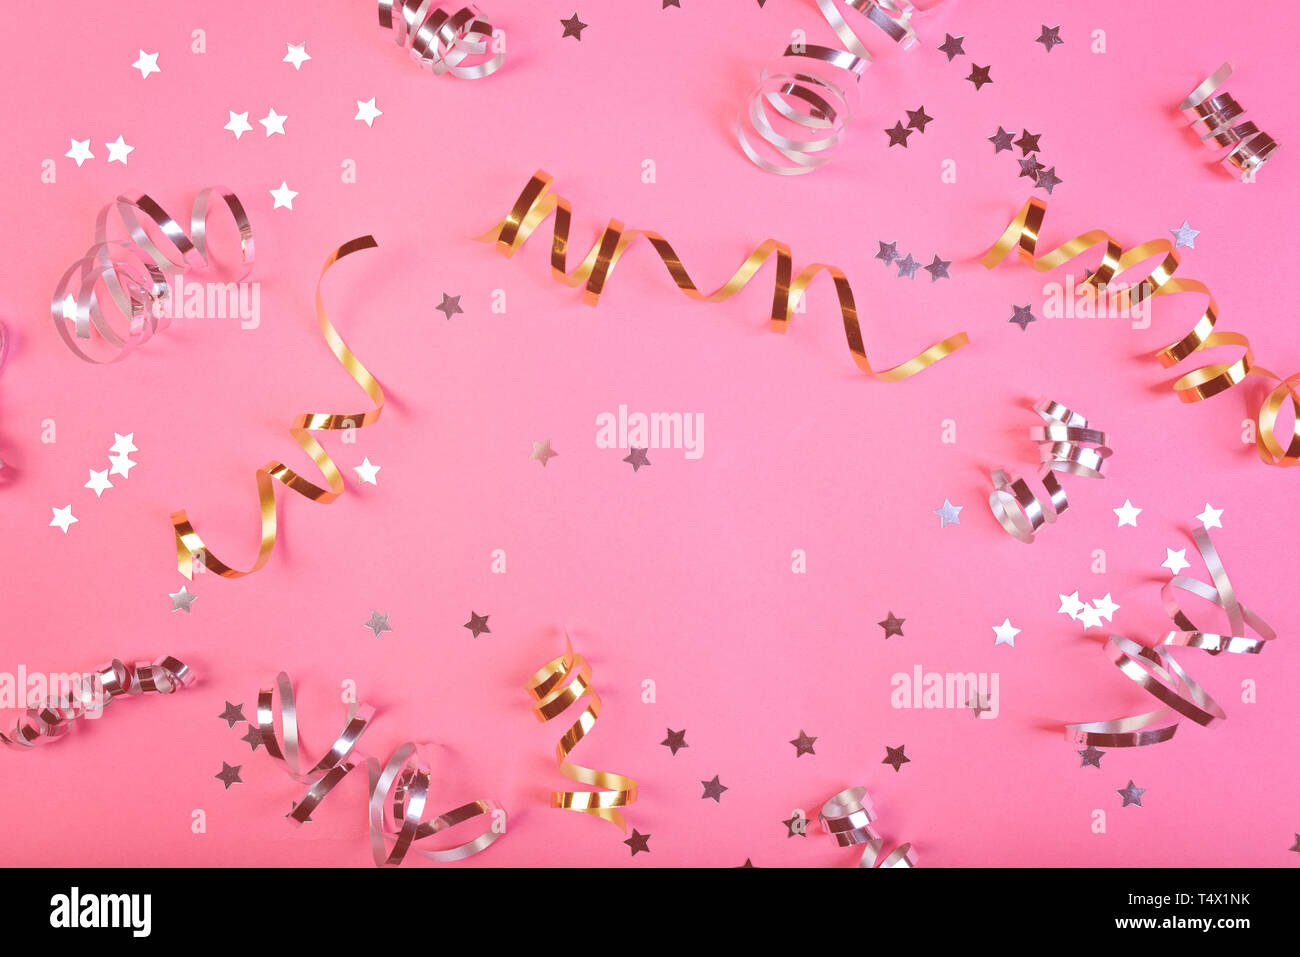 Background about a party, confetti, stars and streamers. Stock Photo